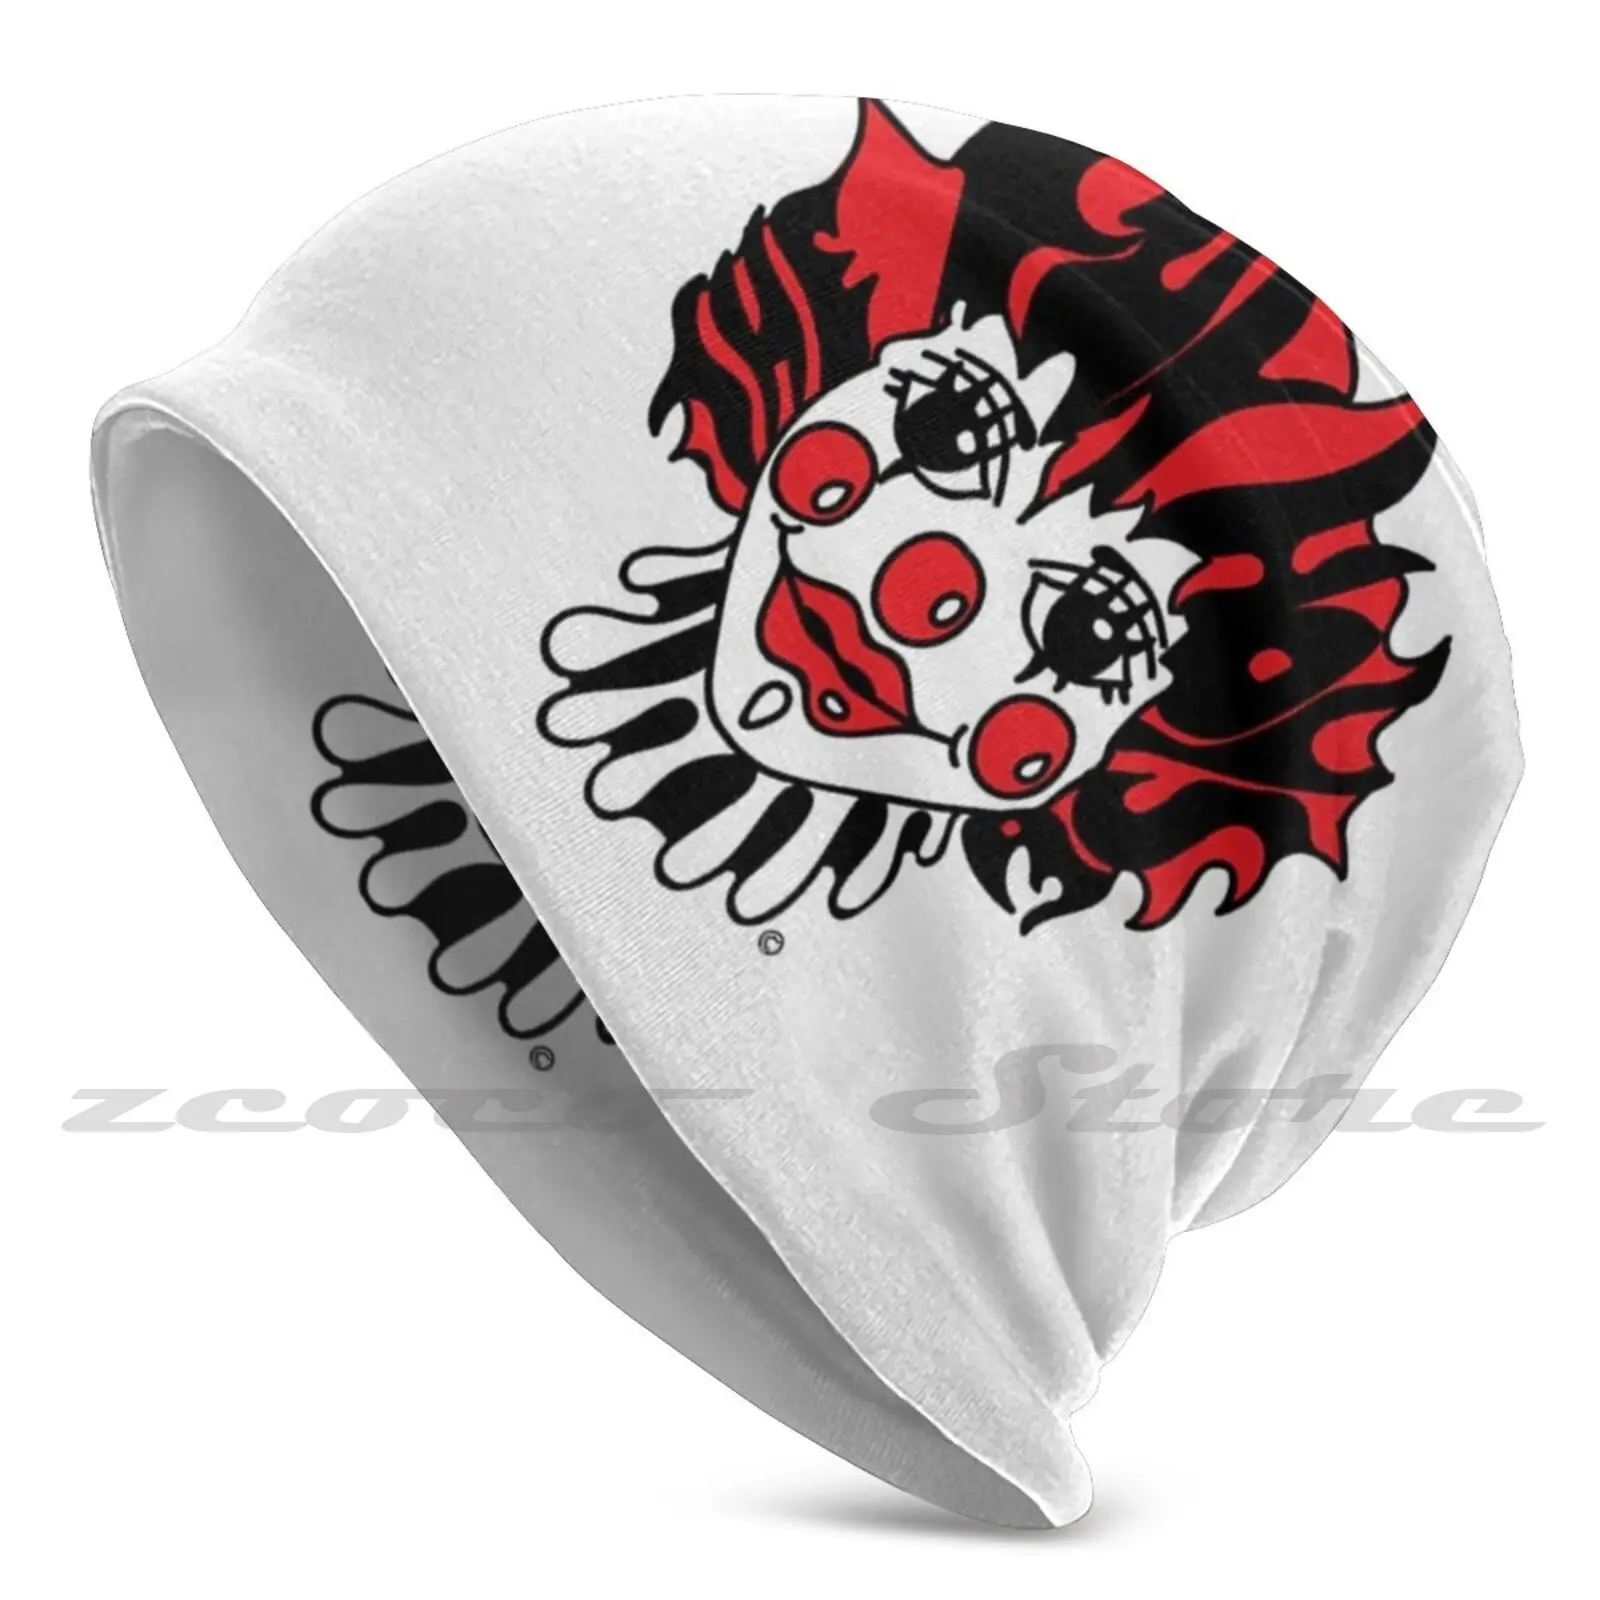 Original Fun House Diy Pullover Cap Knit Hat Plus Size Keep Warm Elastic Soft Coffee Window Clings Wall Mats Bed Cover Bed